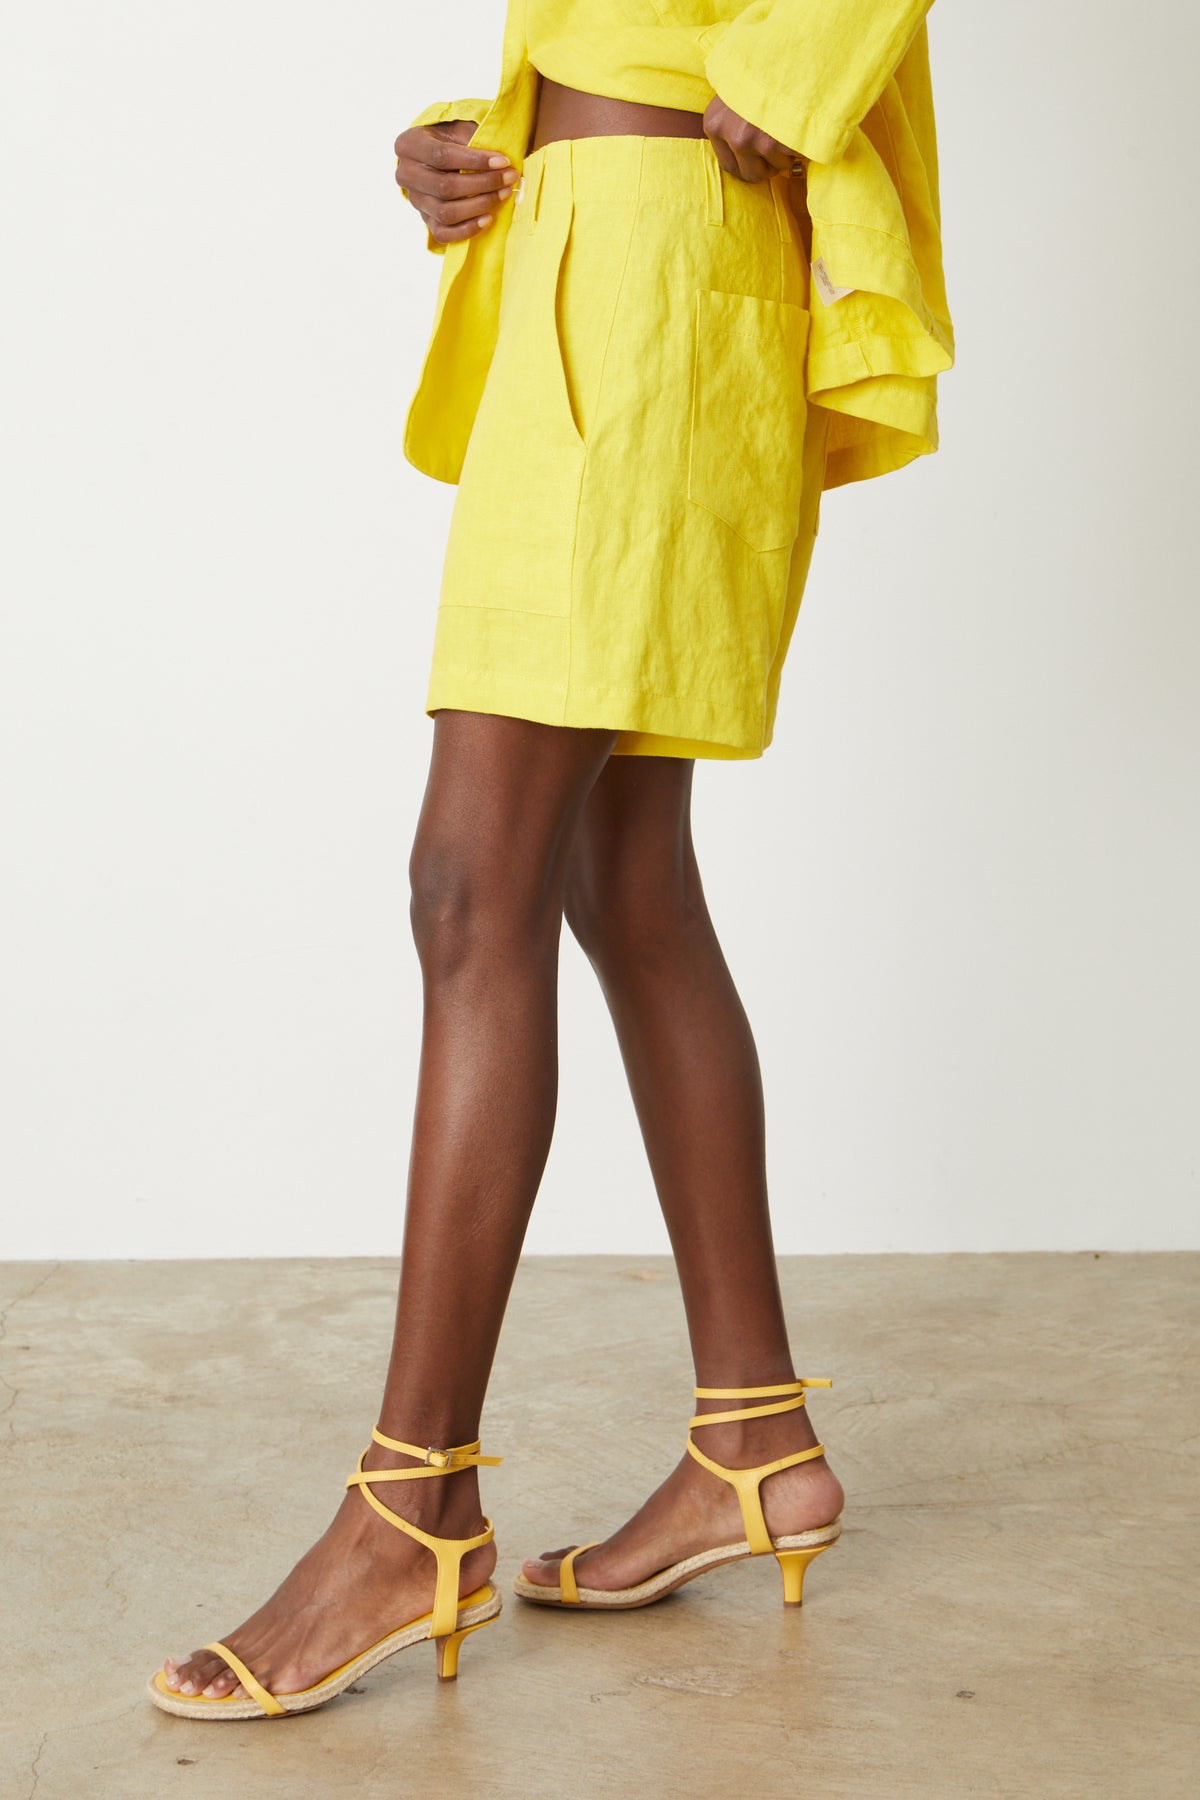 A woman wearing a yellow top and the Velvet by Graham & Spencer Fallon Heavy Linen Shorts with zipper and button closure, made of heavy linen fabric, for summer.-35204862869697